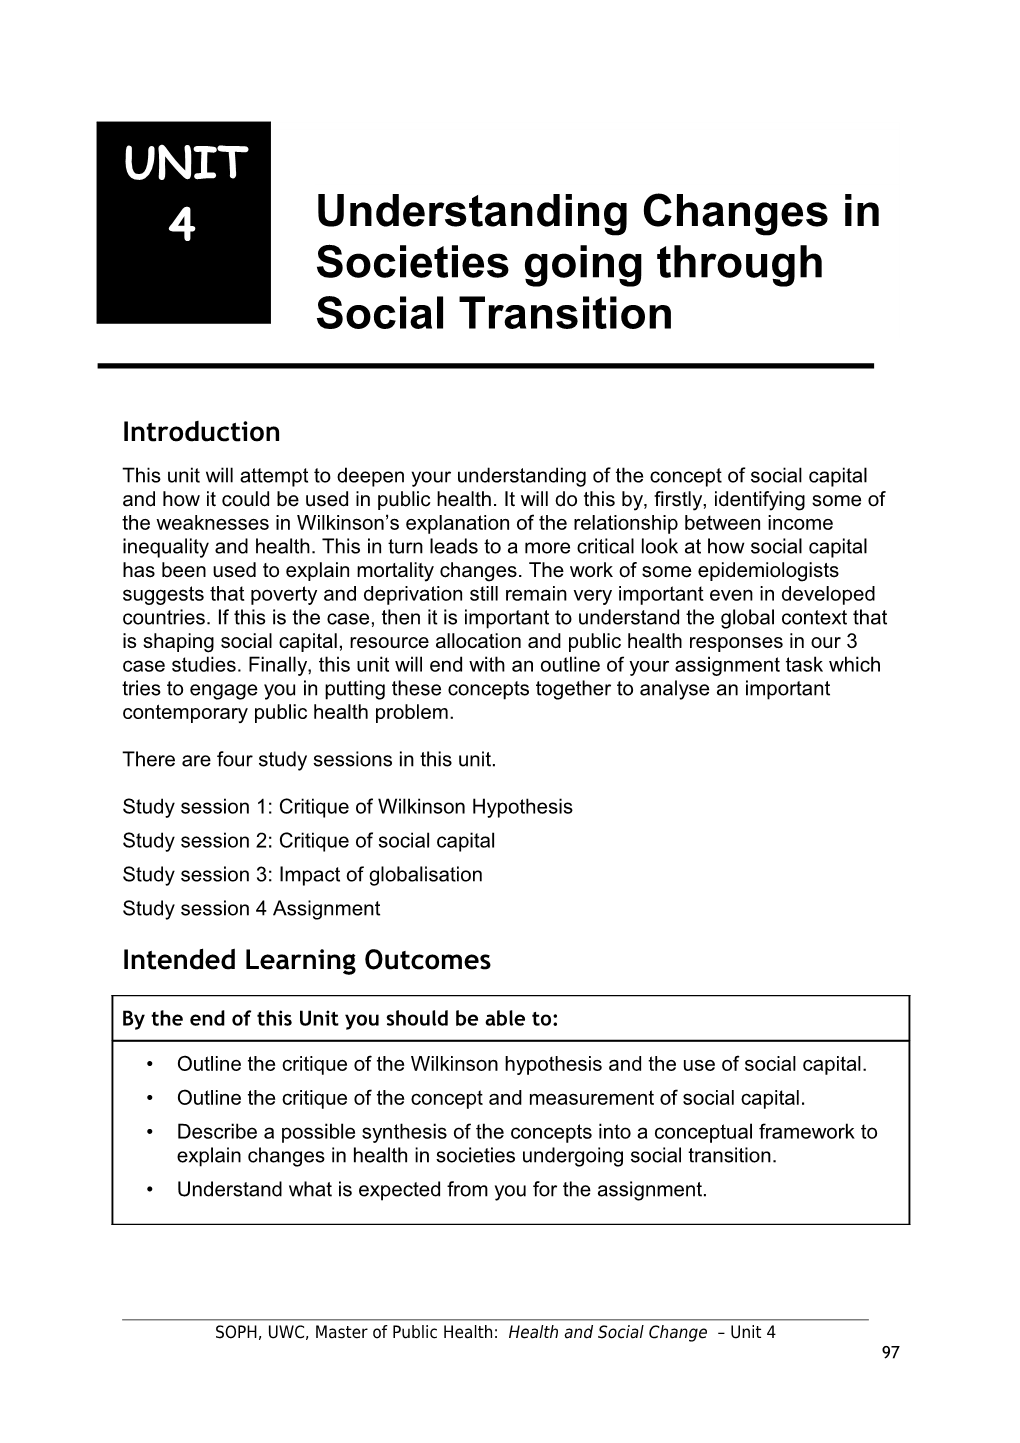 Understanding Changes in Societies Going Through Social Transition